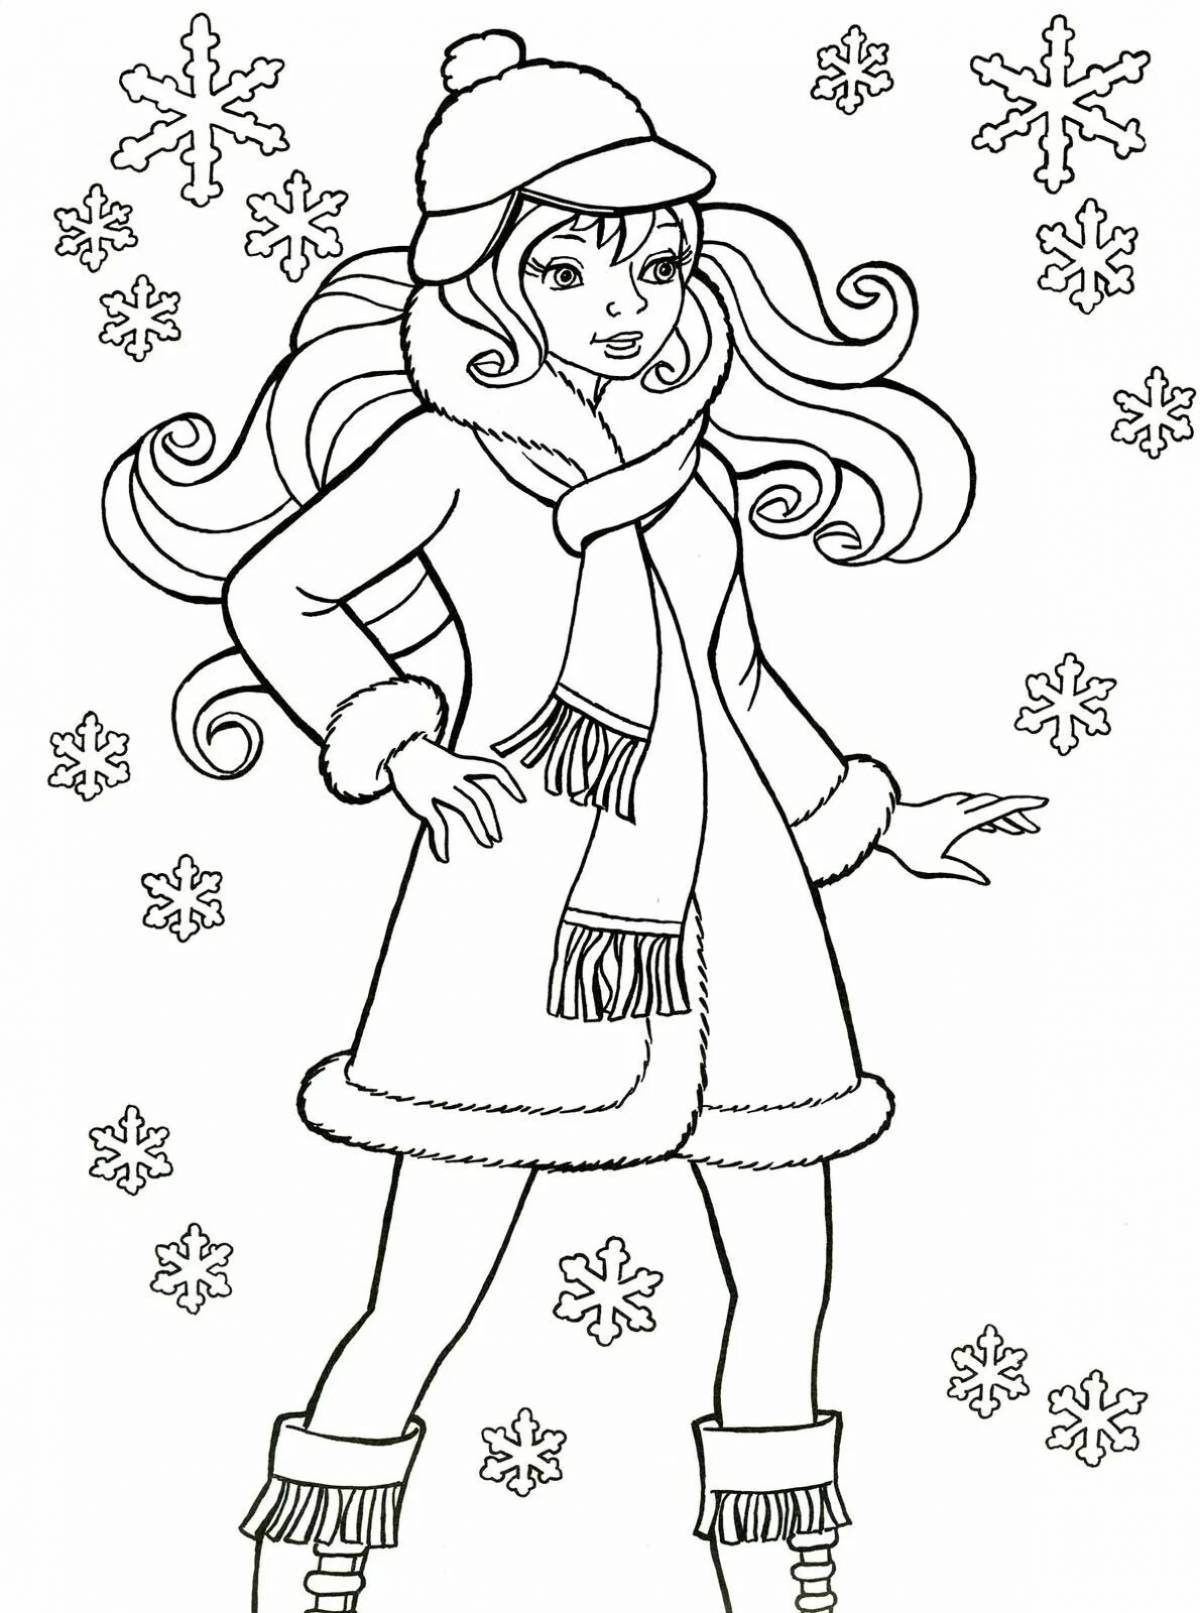 Snow Maiden serene coloring book for girls